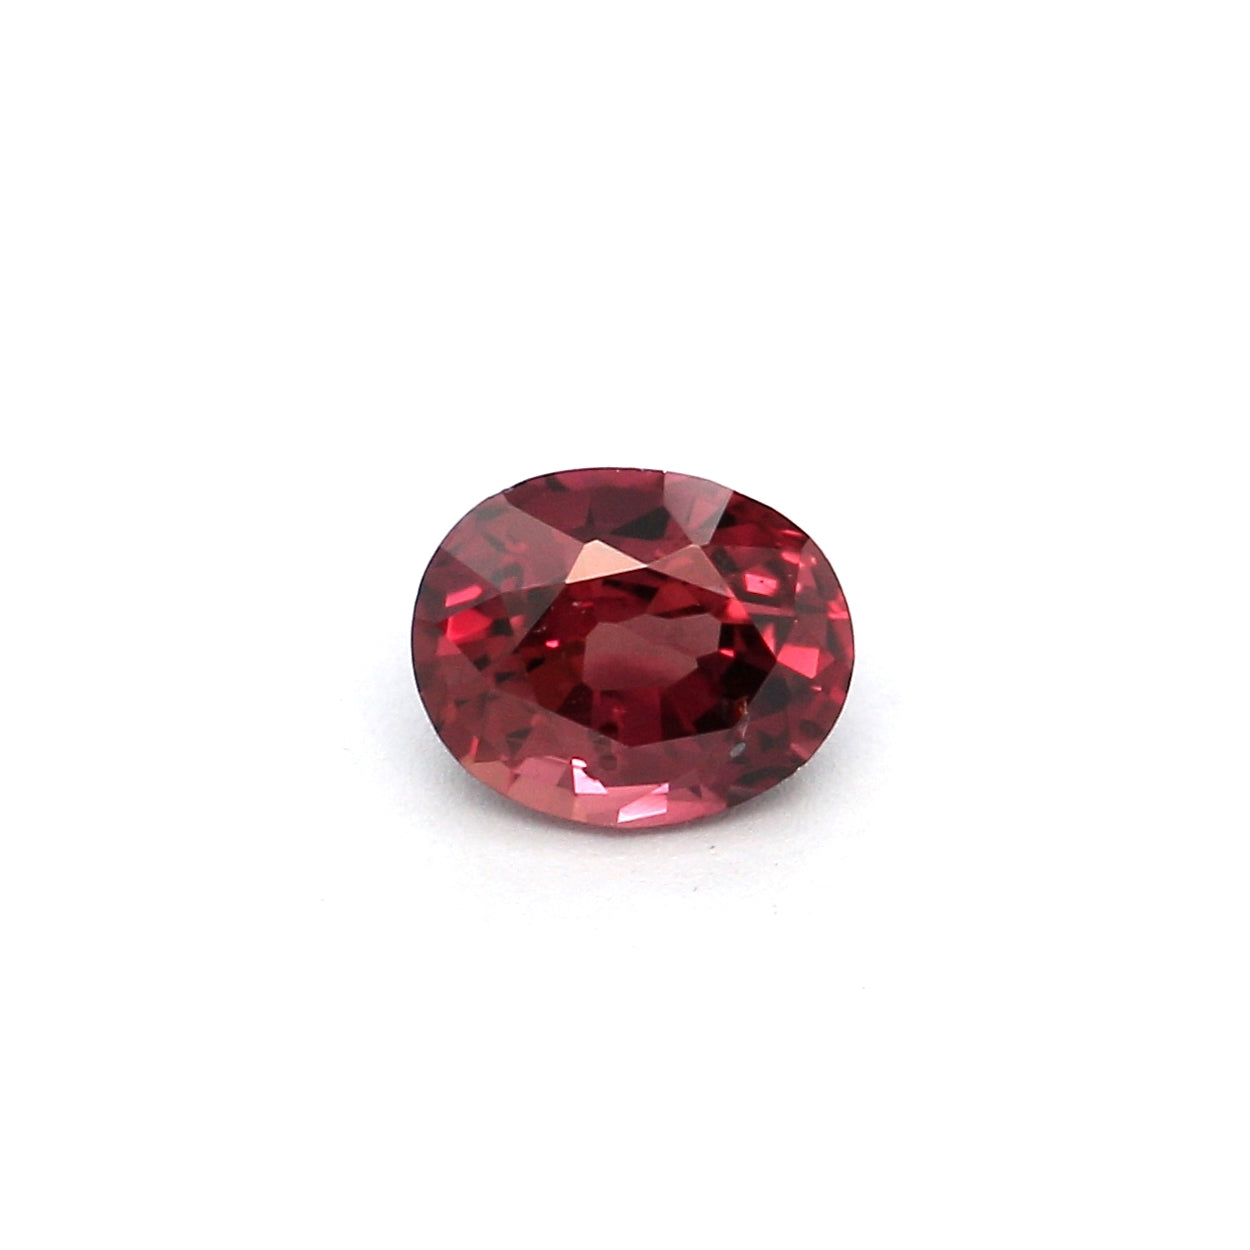 0.42ct Orangy Red, Oval Ruby, Heated, Thailand - 4.86 x 3.96 x 2.76mm